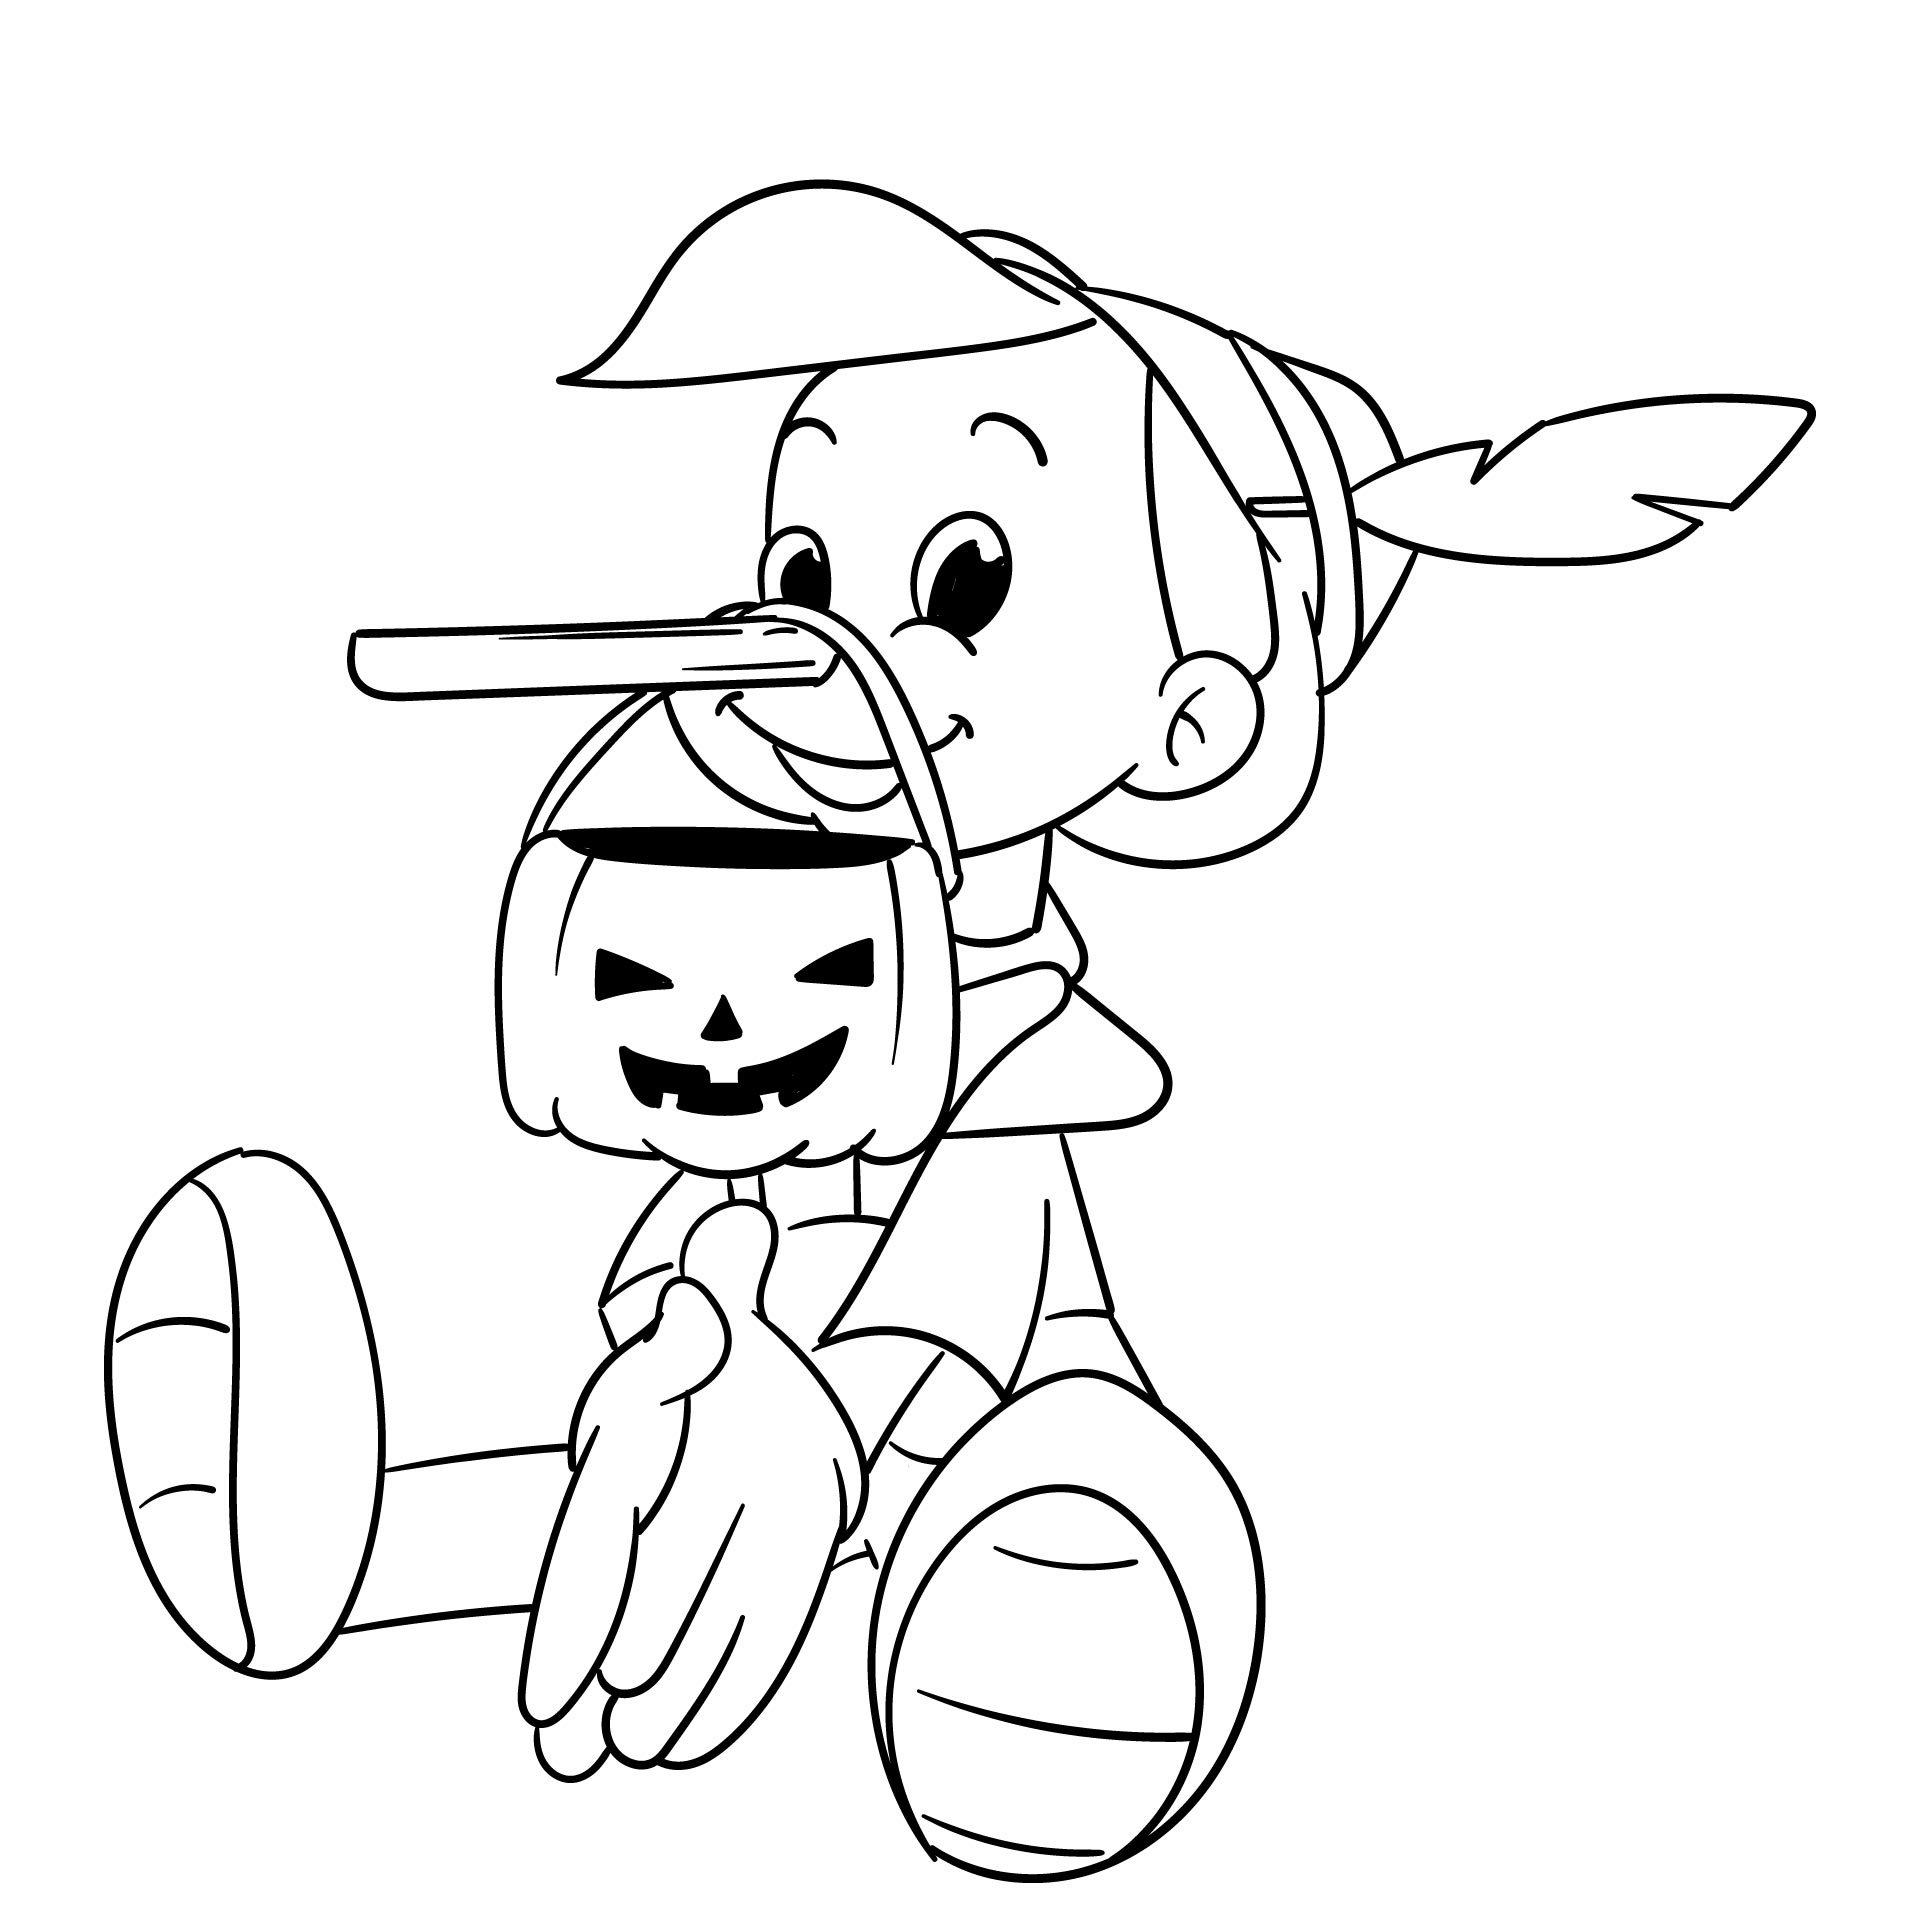 15 Best Disney Halloween Coloring Pages Printable 